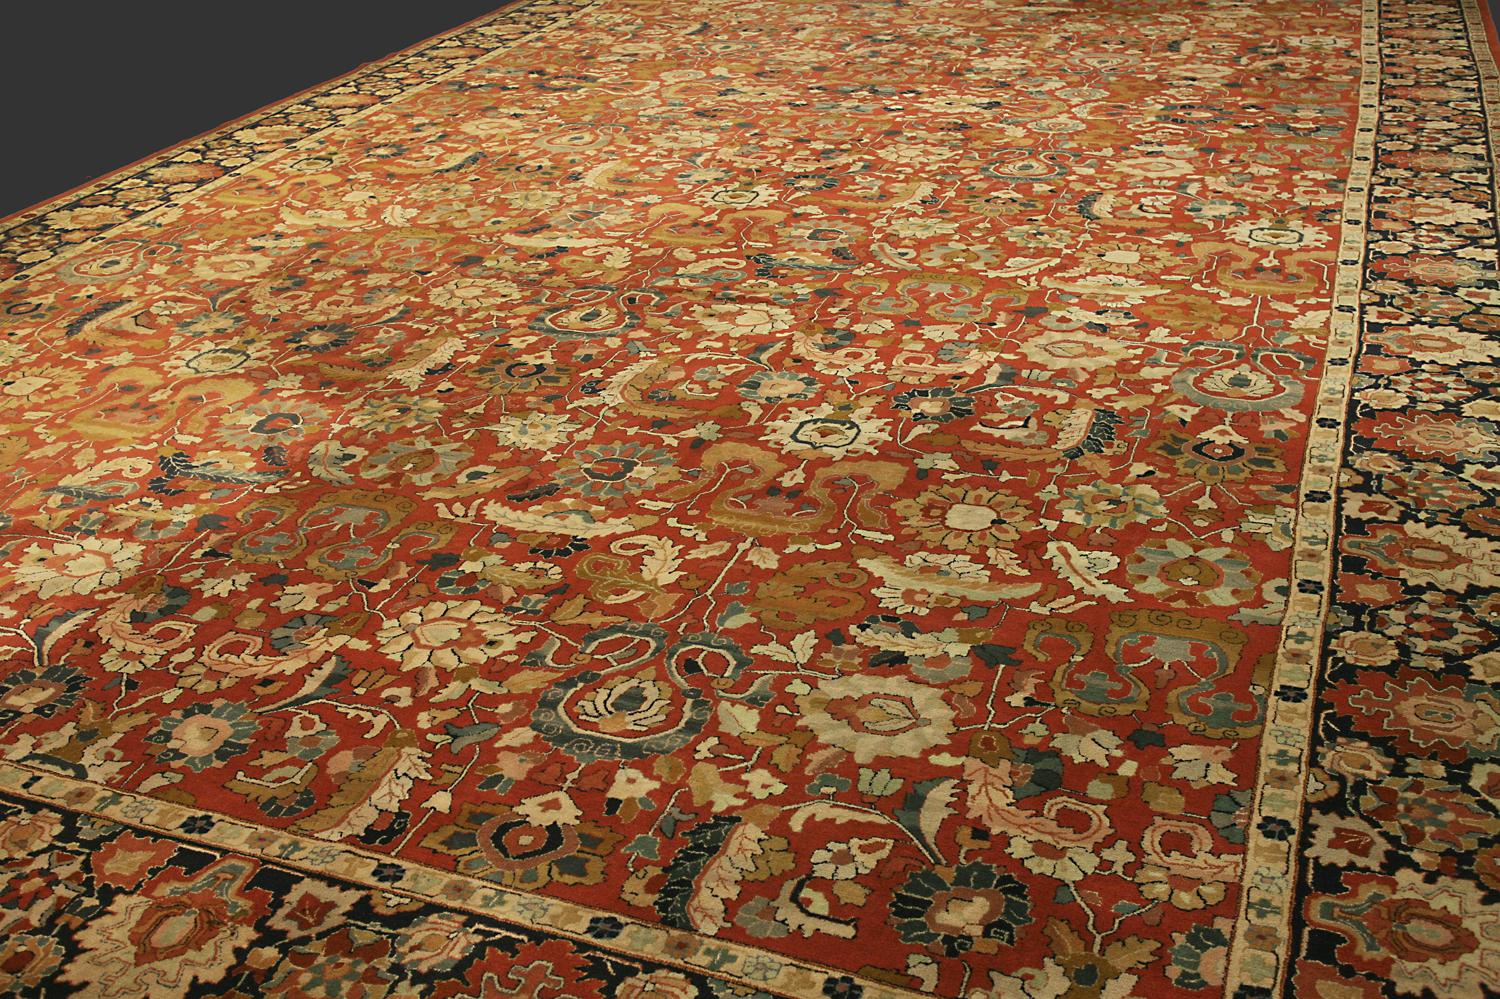 Floral All-Over Field Massive Antique German Rust Tetex Carpet, ca. 1920 For Sale 1